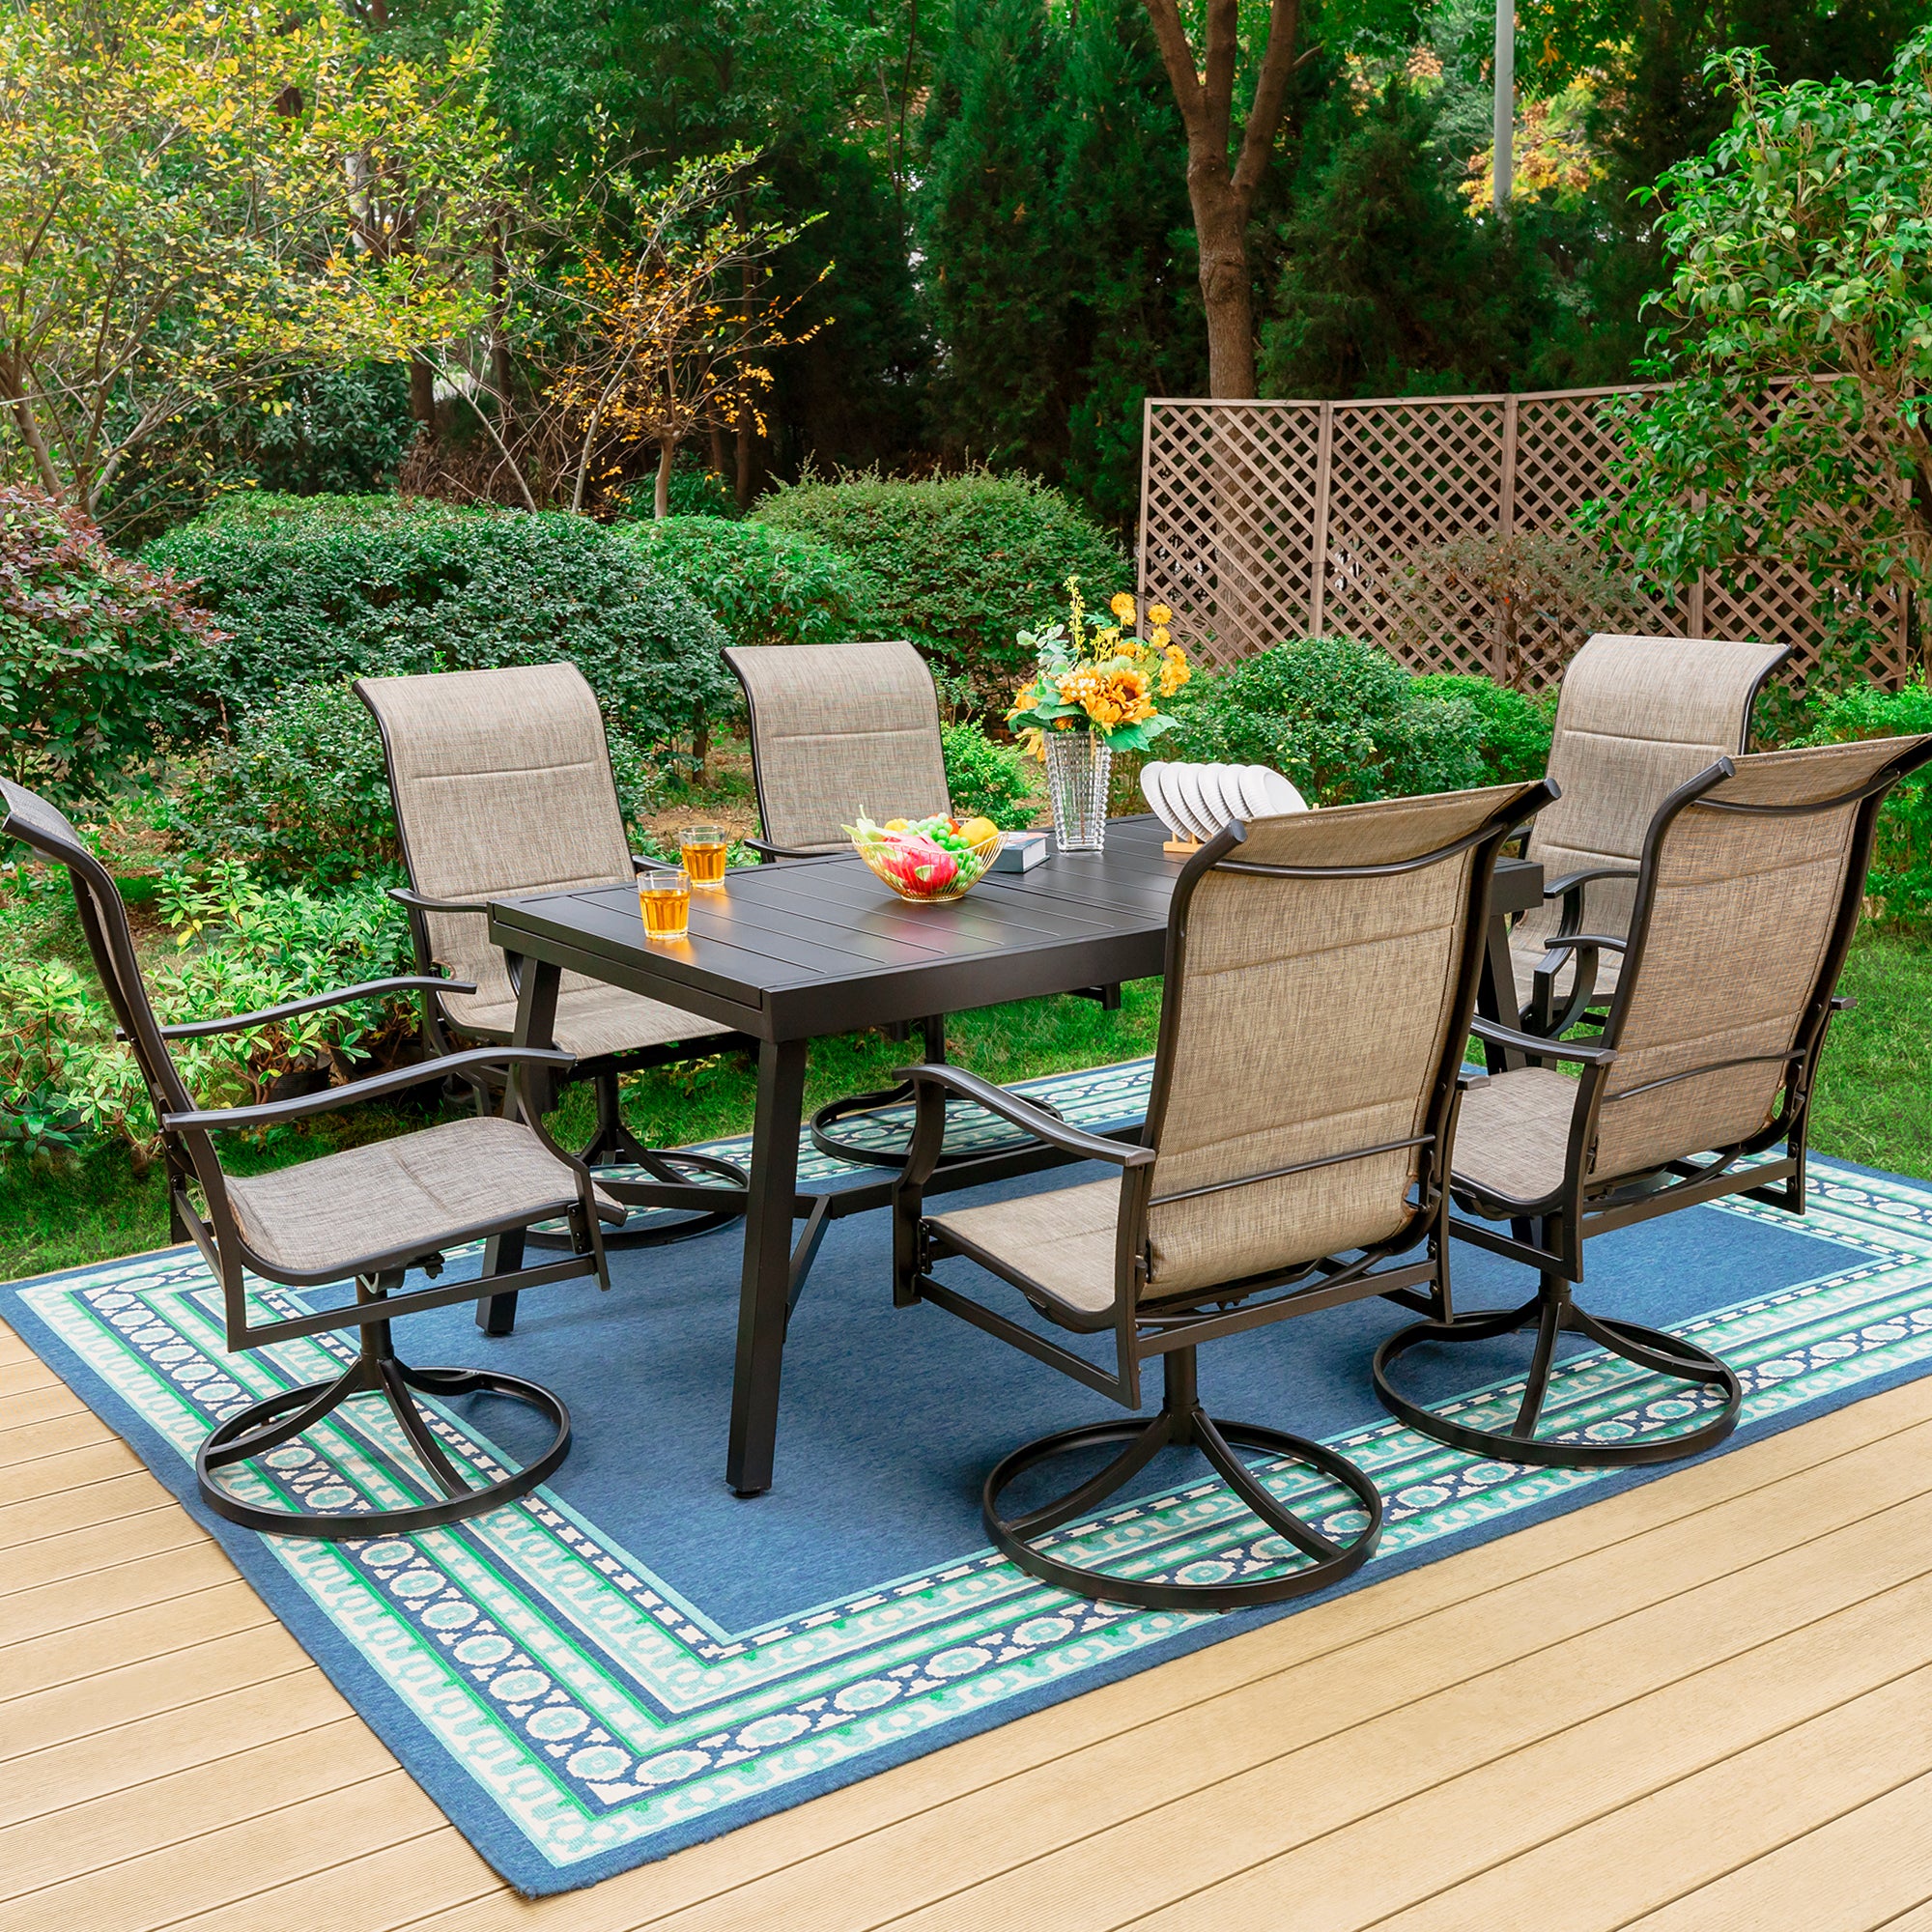 PHI VILLA 9/7-Piece Patio Dining Sets Reinforced Extendable Table & High-back Textilene Patio Dining Chairs